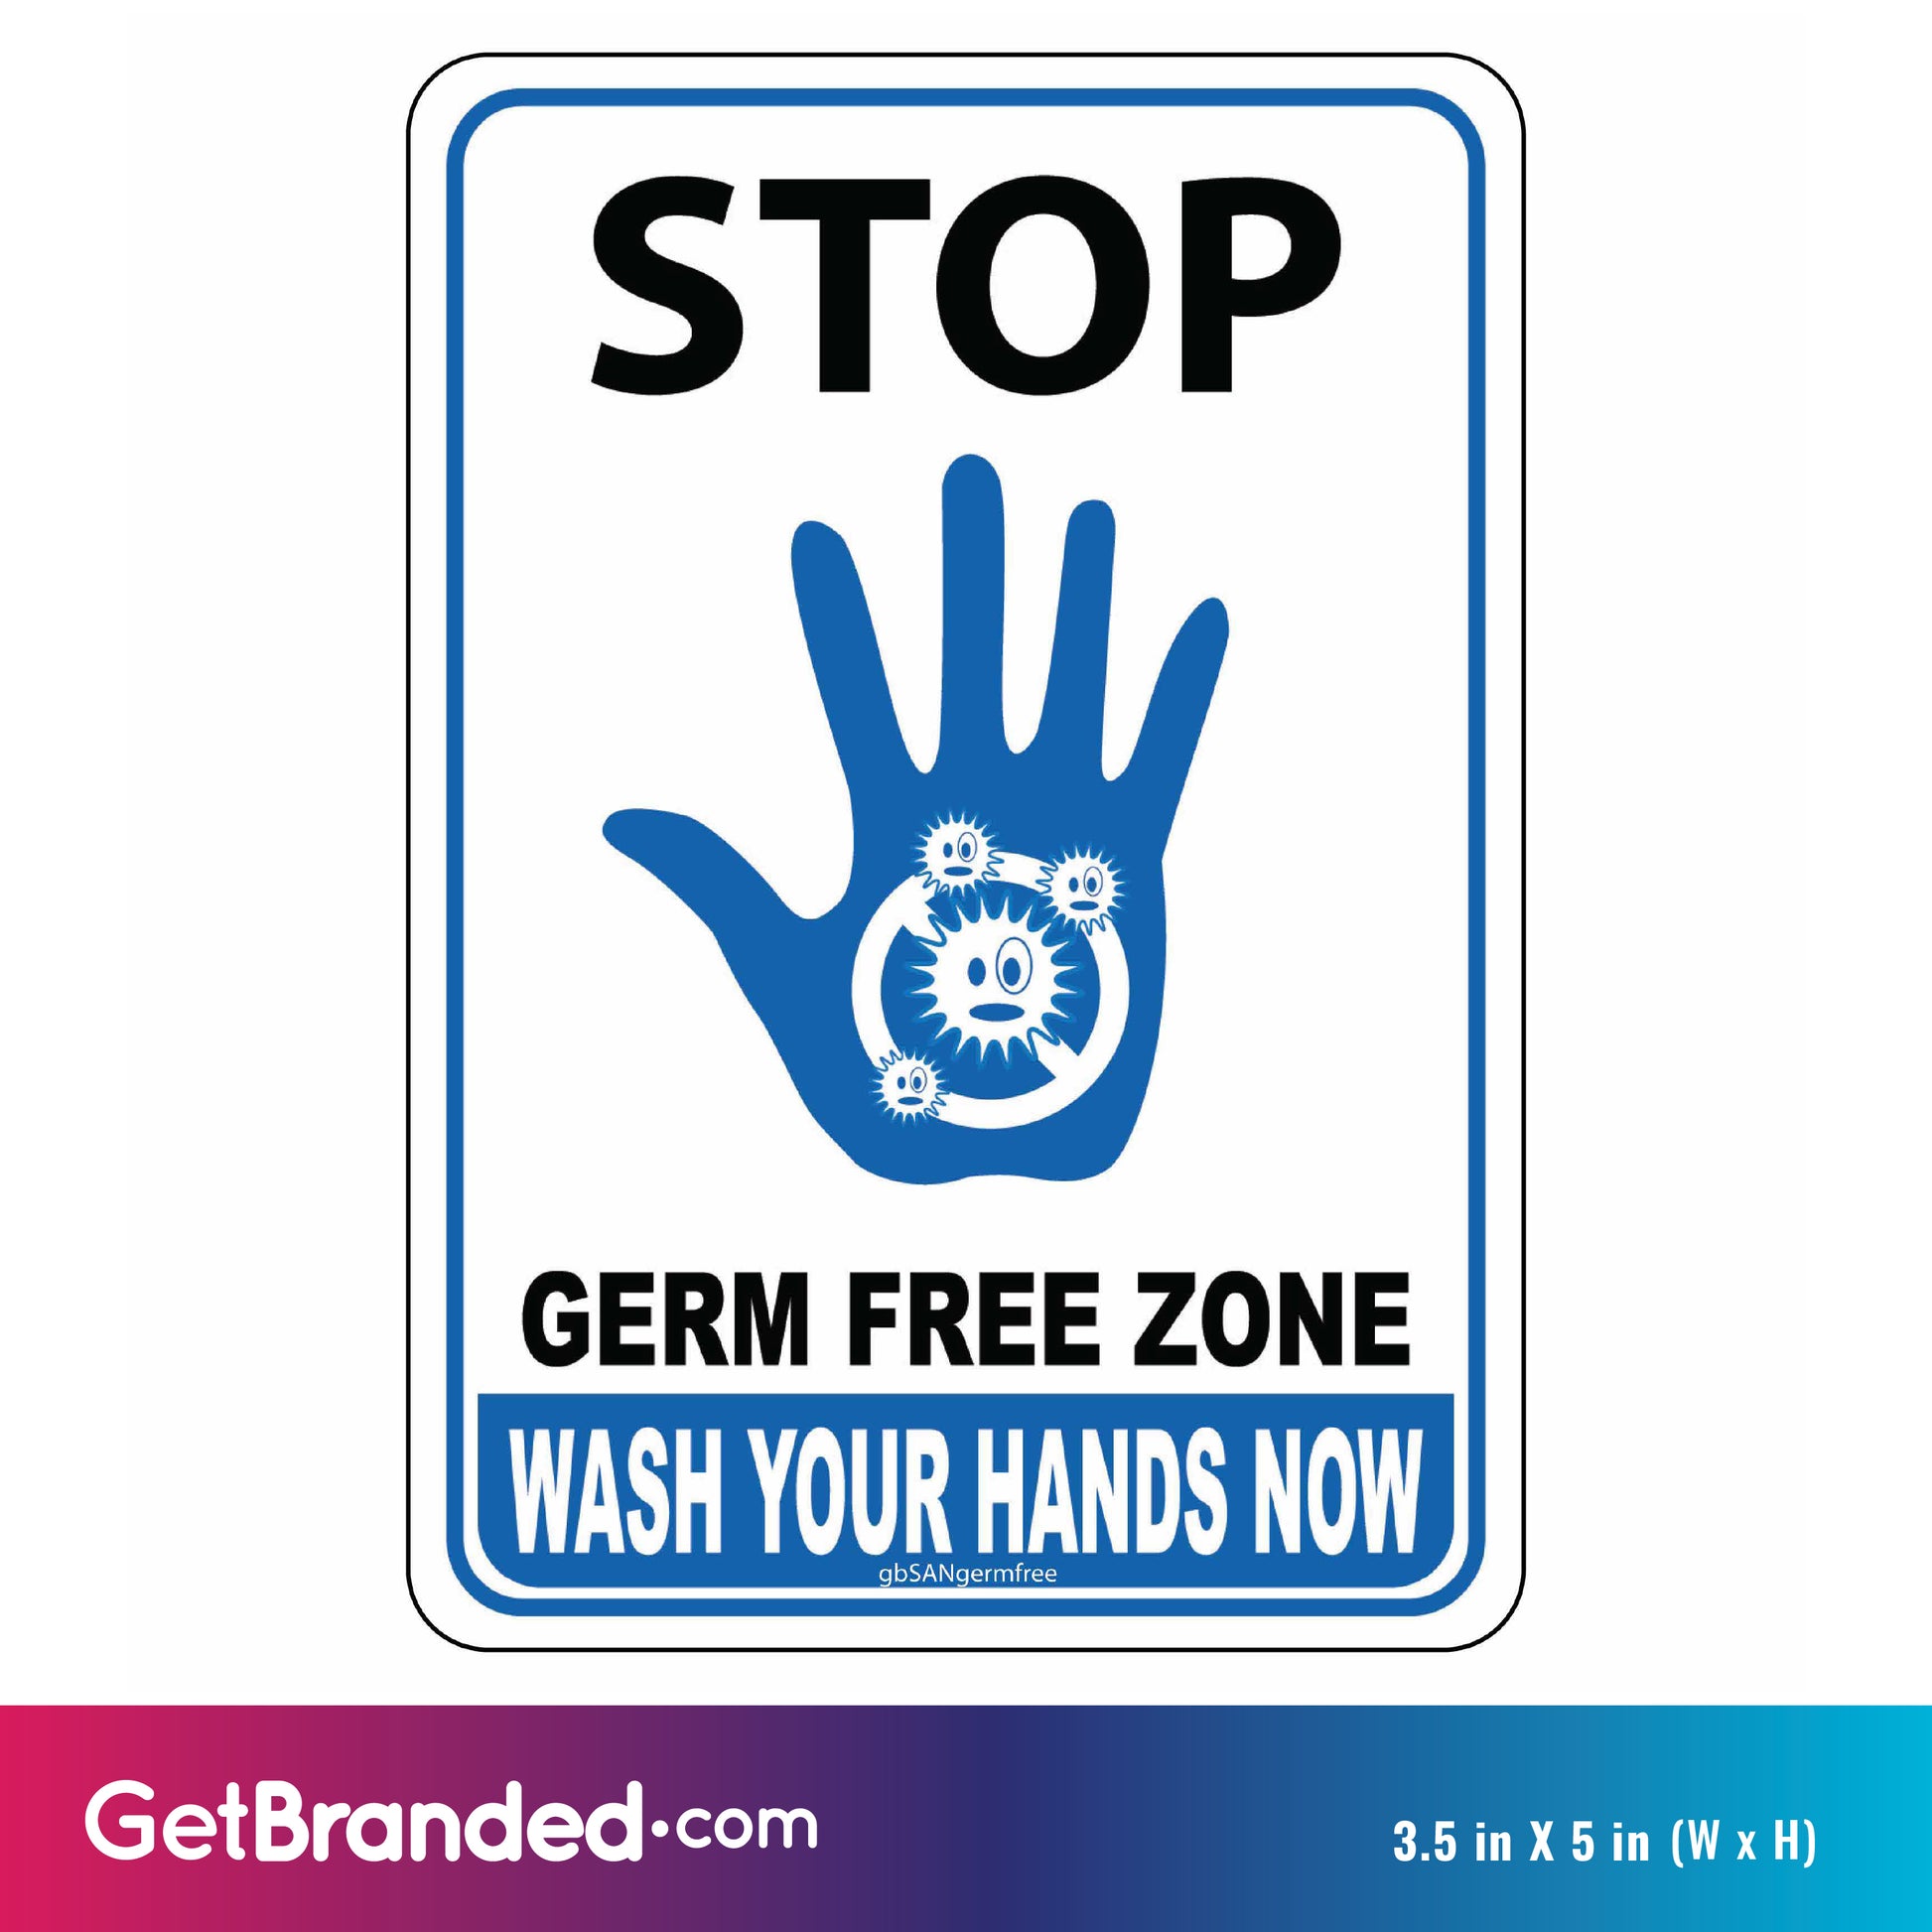 Stop, Germ Free Zone Decal size guide.